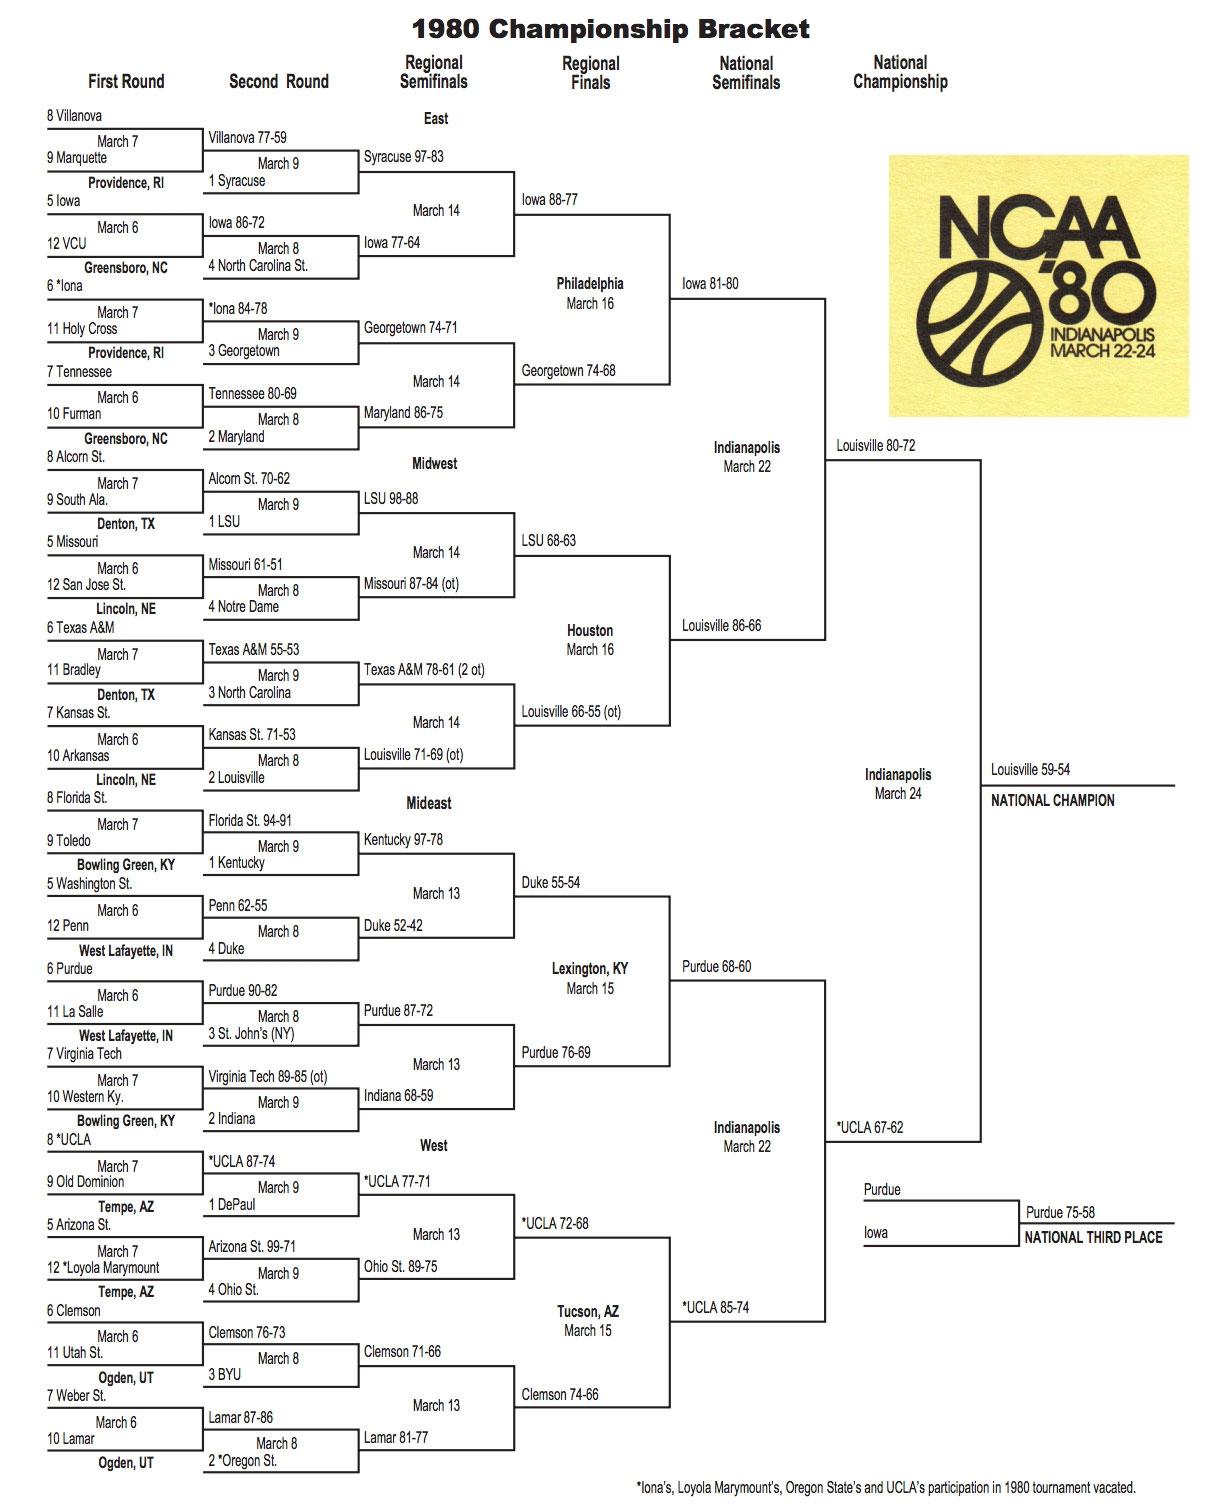 This is the 1980 NCAA tournament bracket